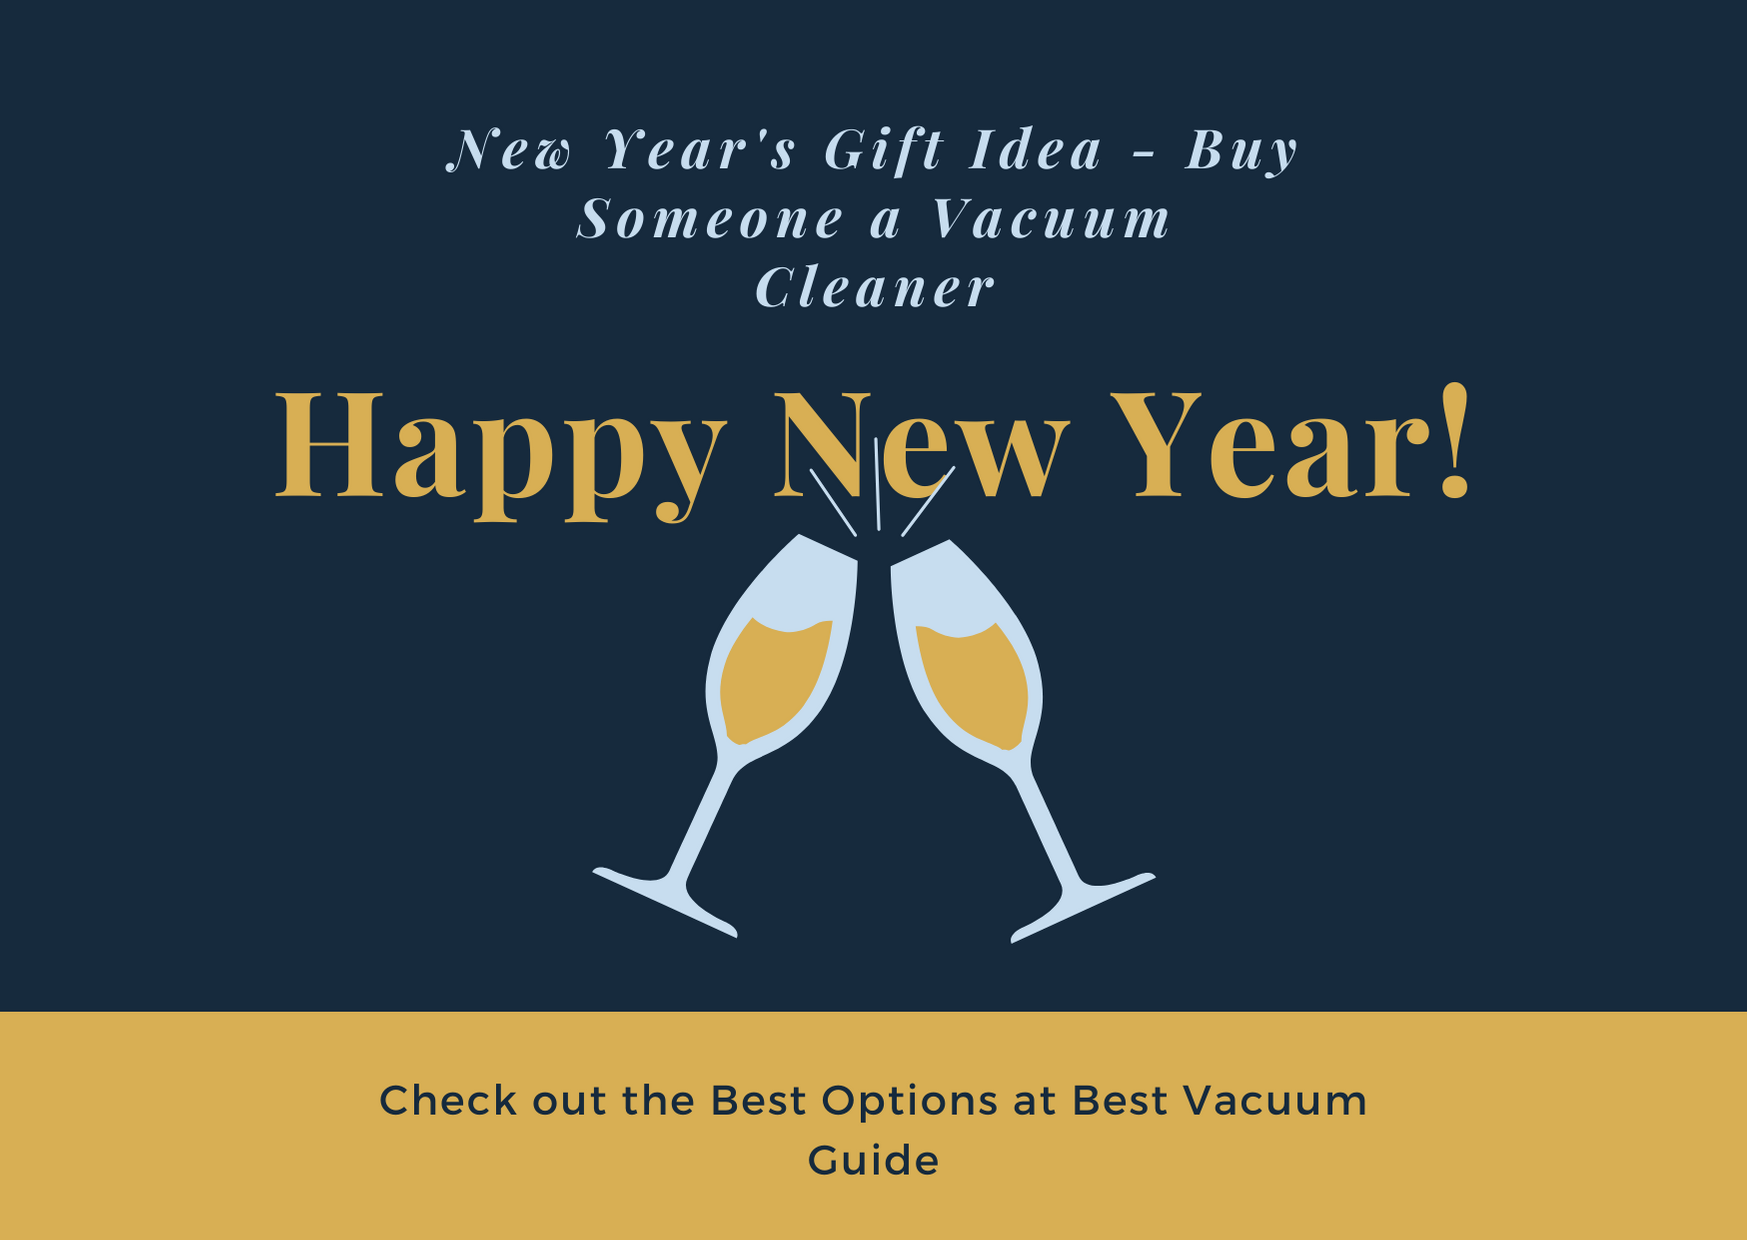 Vacuum Cleaner Gifts for the New Year